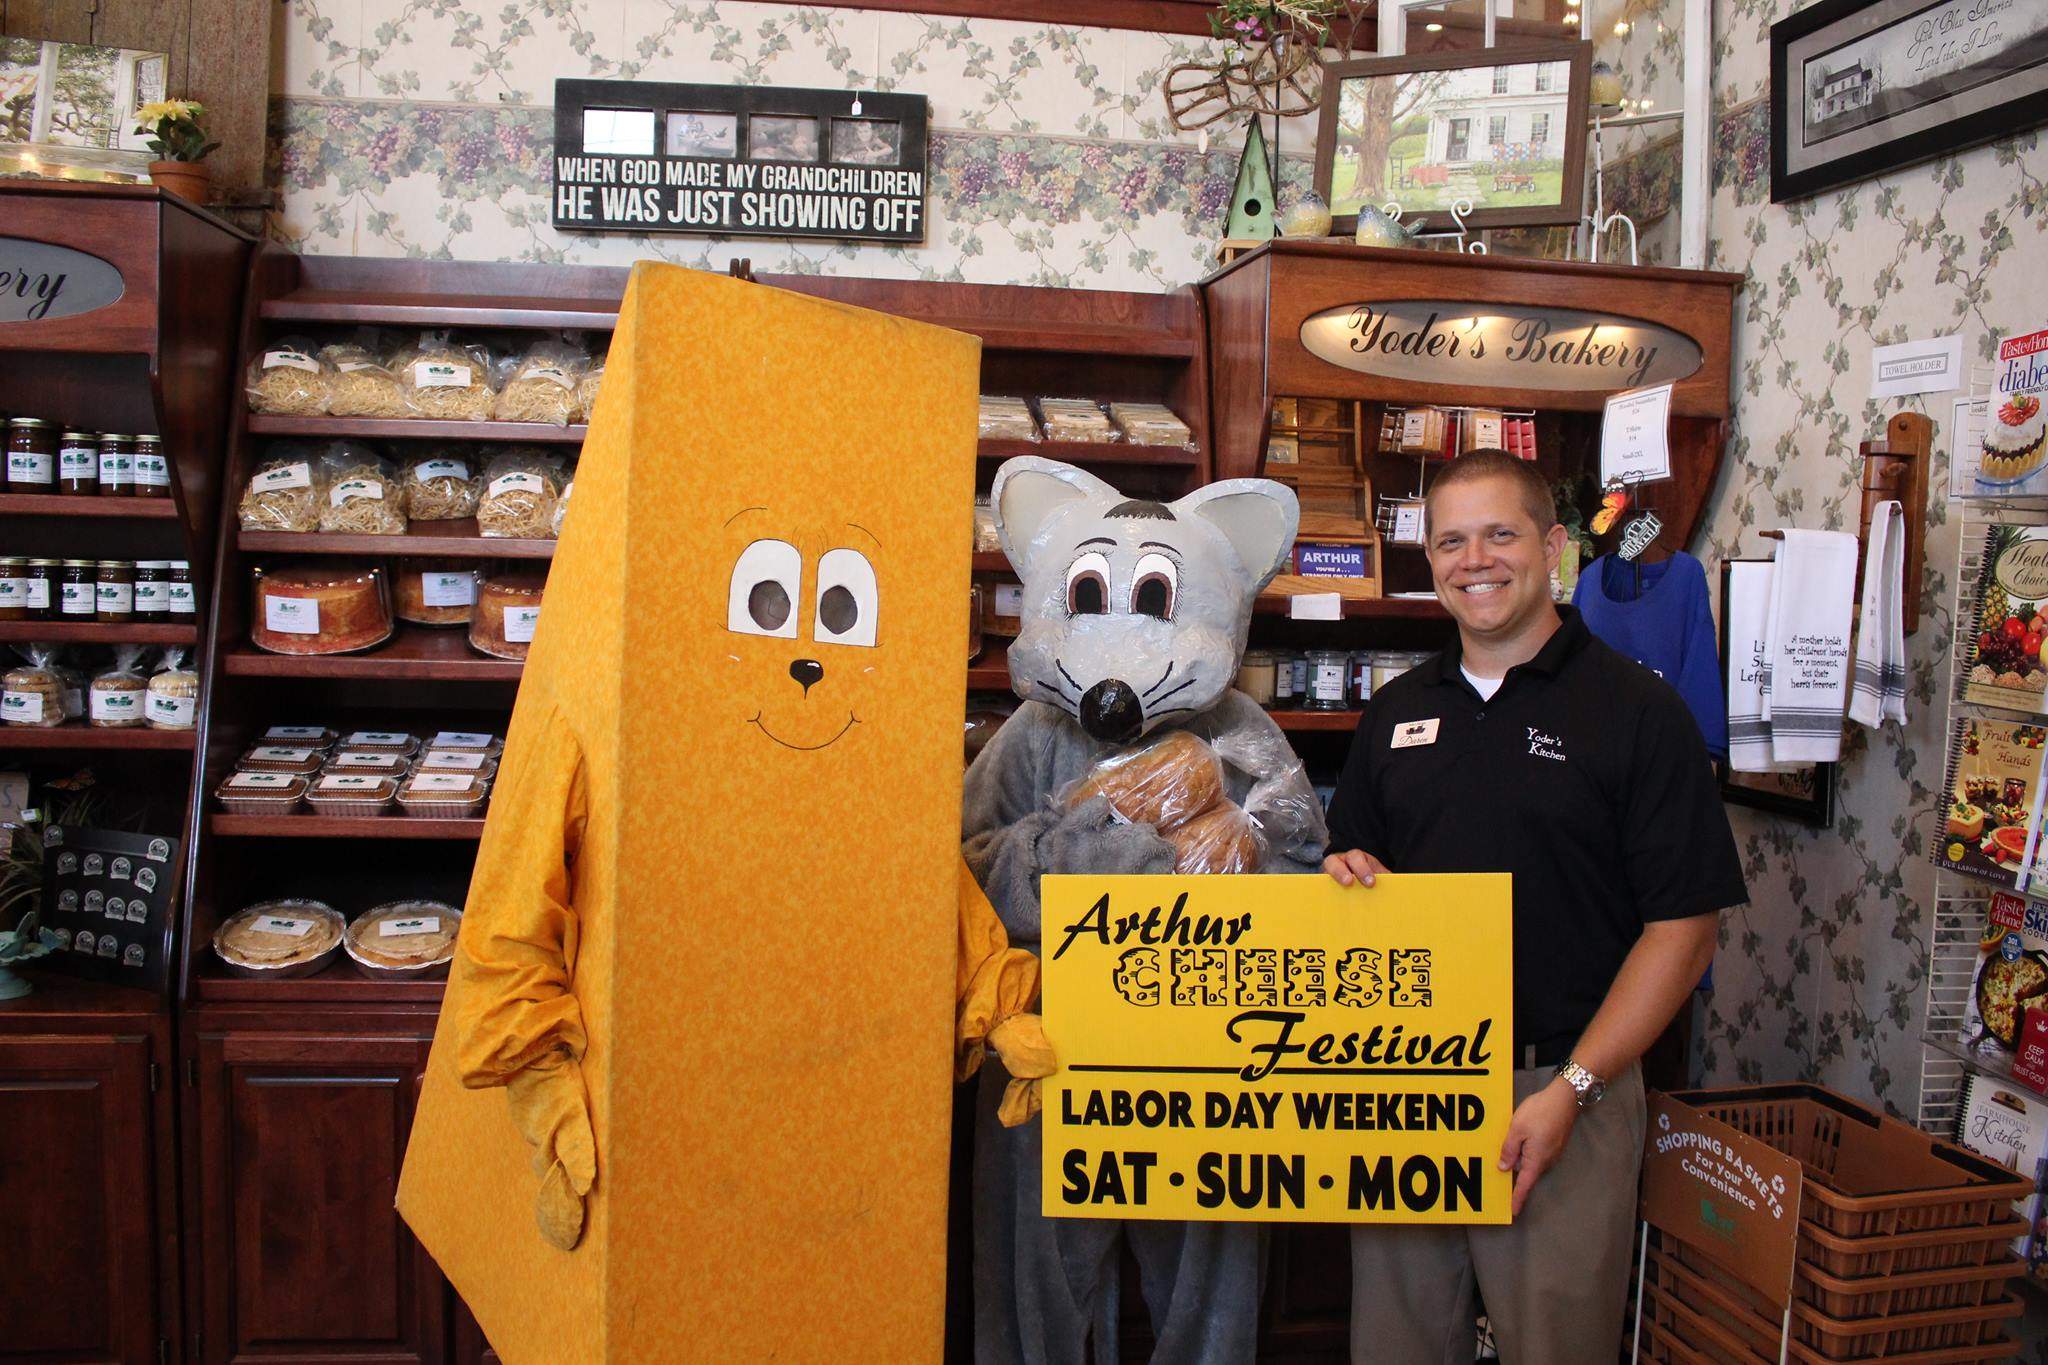 Mascots in a cheese costume and a mouse costume standing alongside a man holding an Arthur Cheese Festival sign